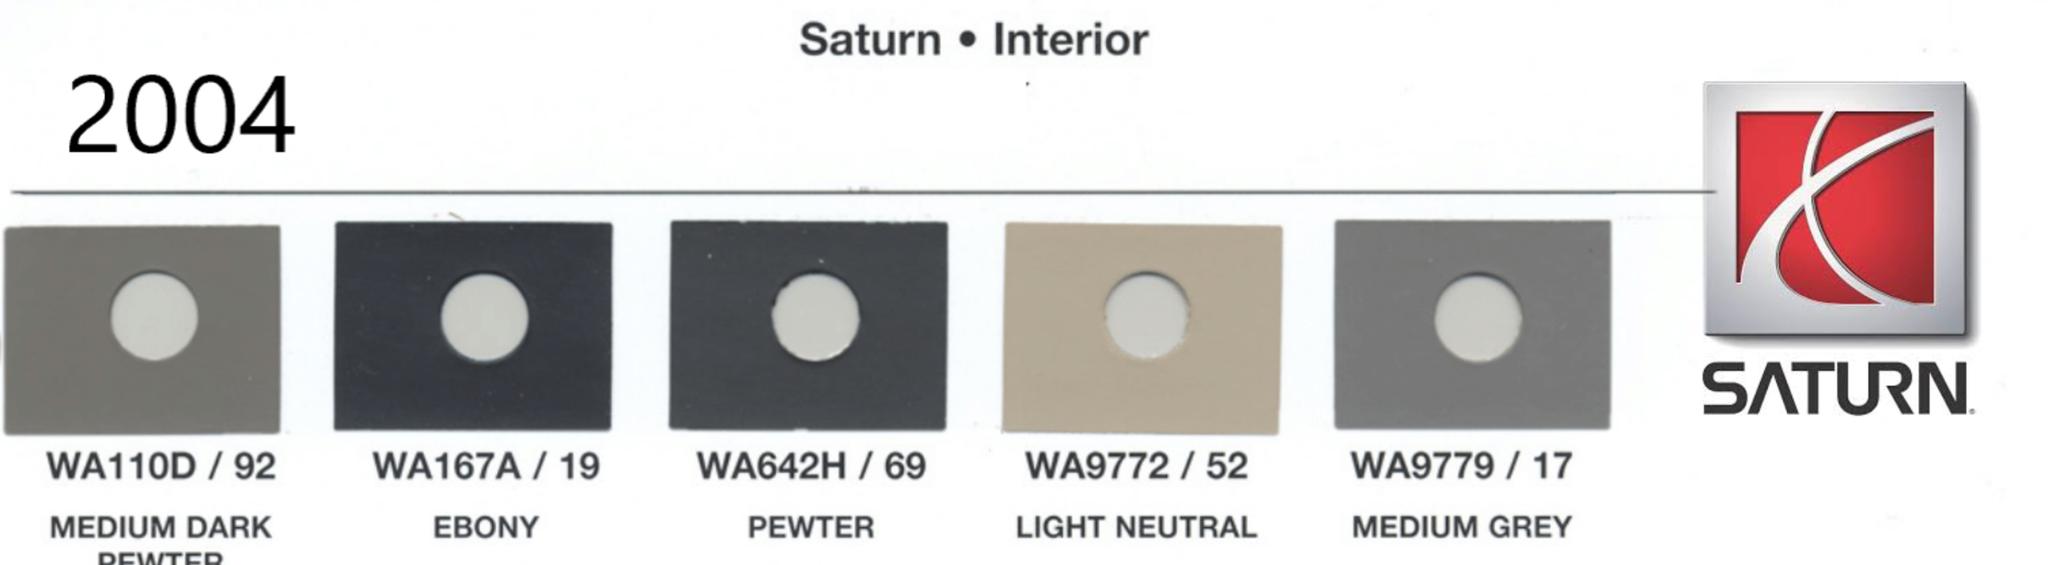 Exterior Color Codes and Color Examples for Saturn